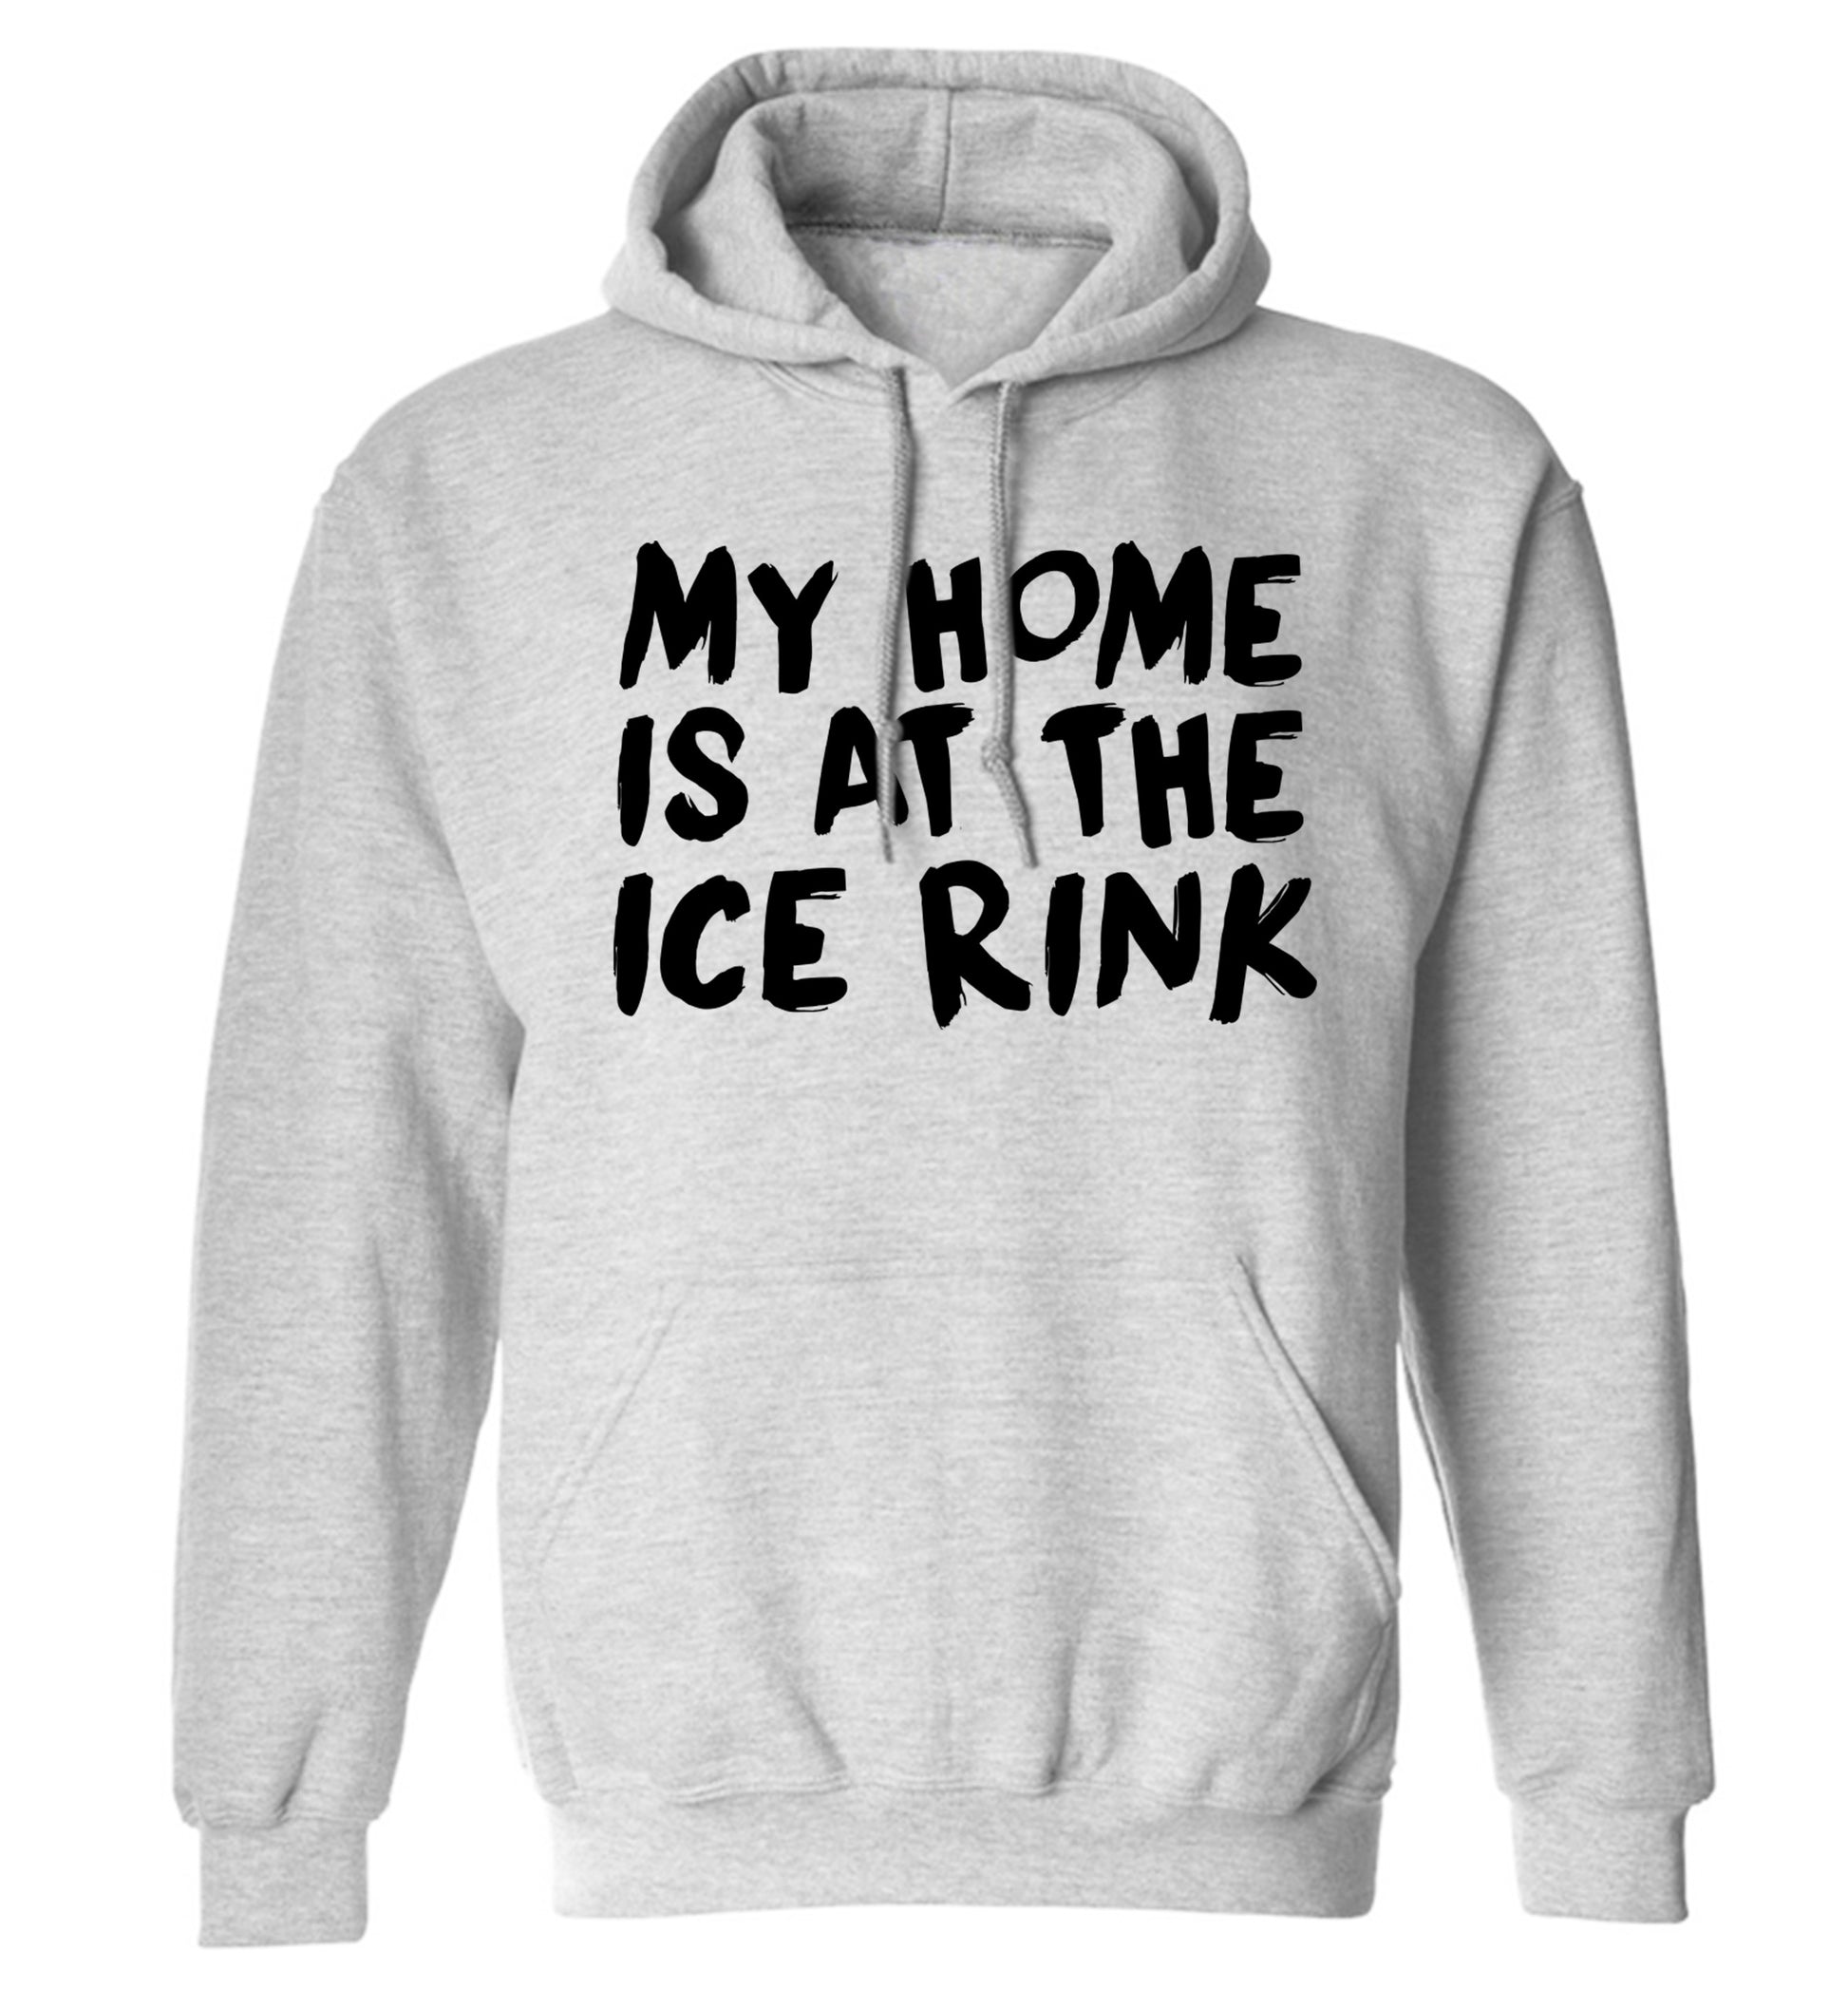 My home is at the ice rink adults unisex grey hoodie 2XL